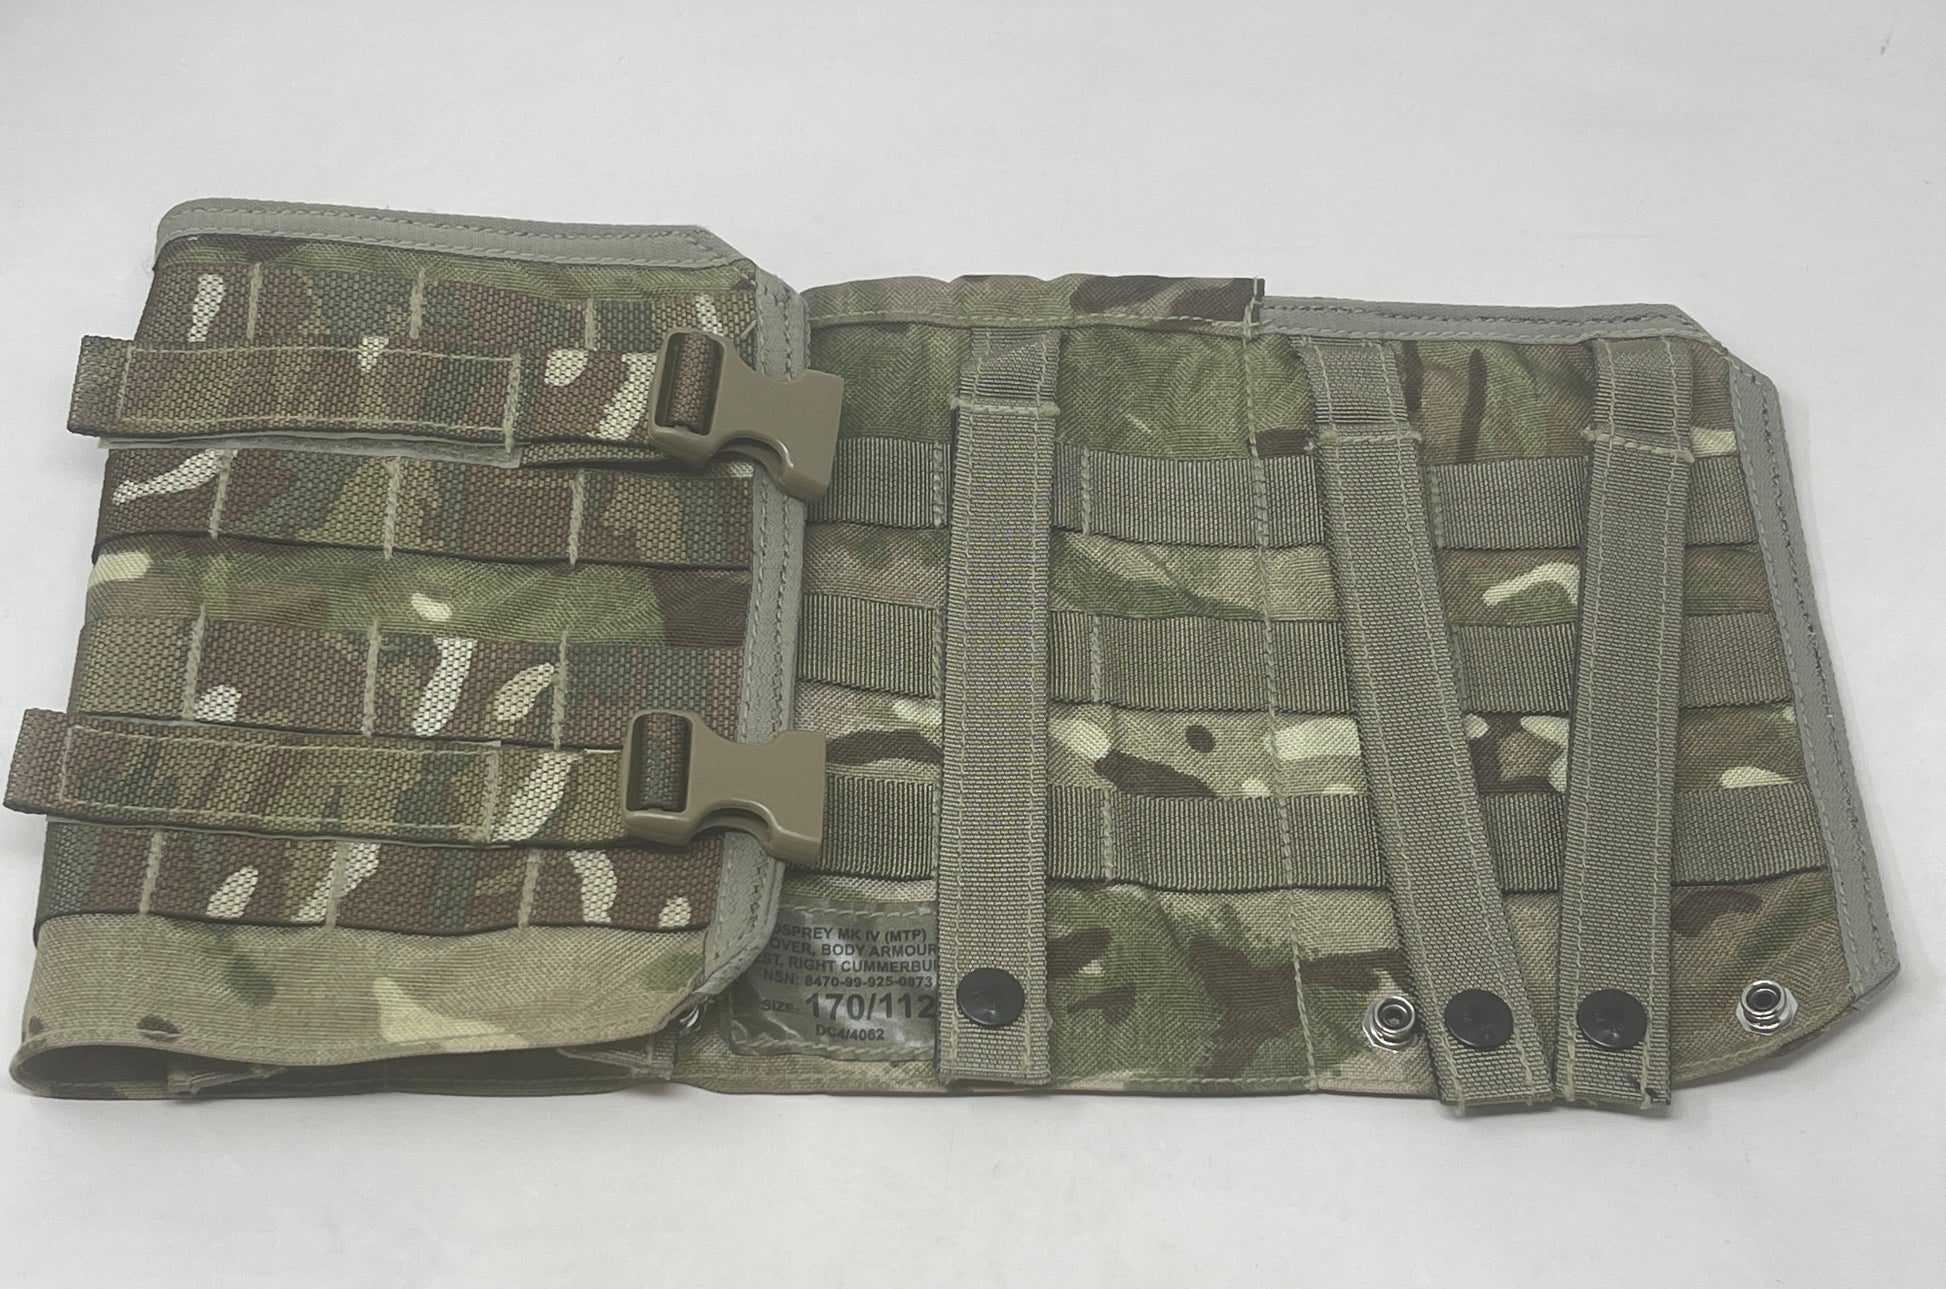 The British Army Osprey Mk1V Cover Body Armour Cummerband Left is a component of the Osprey body armor system used by the British Armed Forces. The cummerband is designed to be attached to the side of the Osprey body armor vest and is used to provide additional support and comfort.